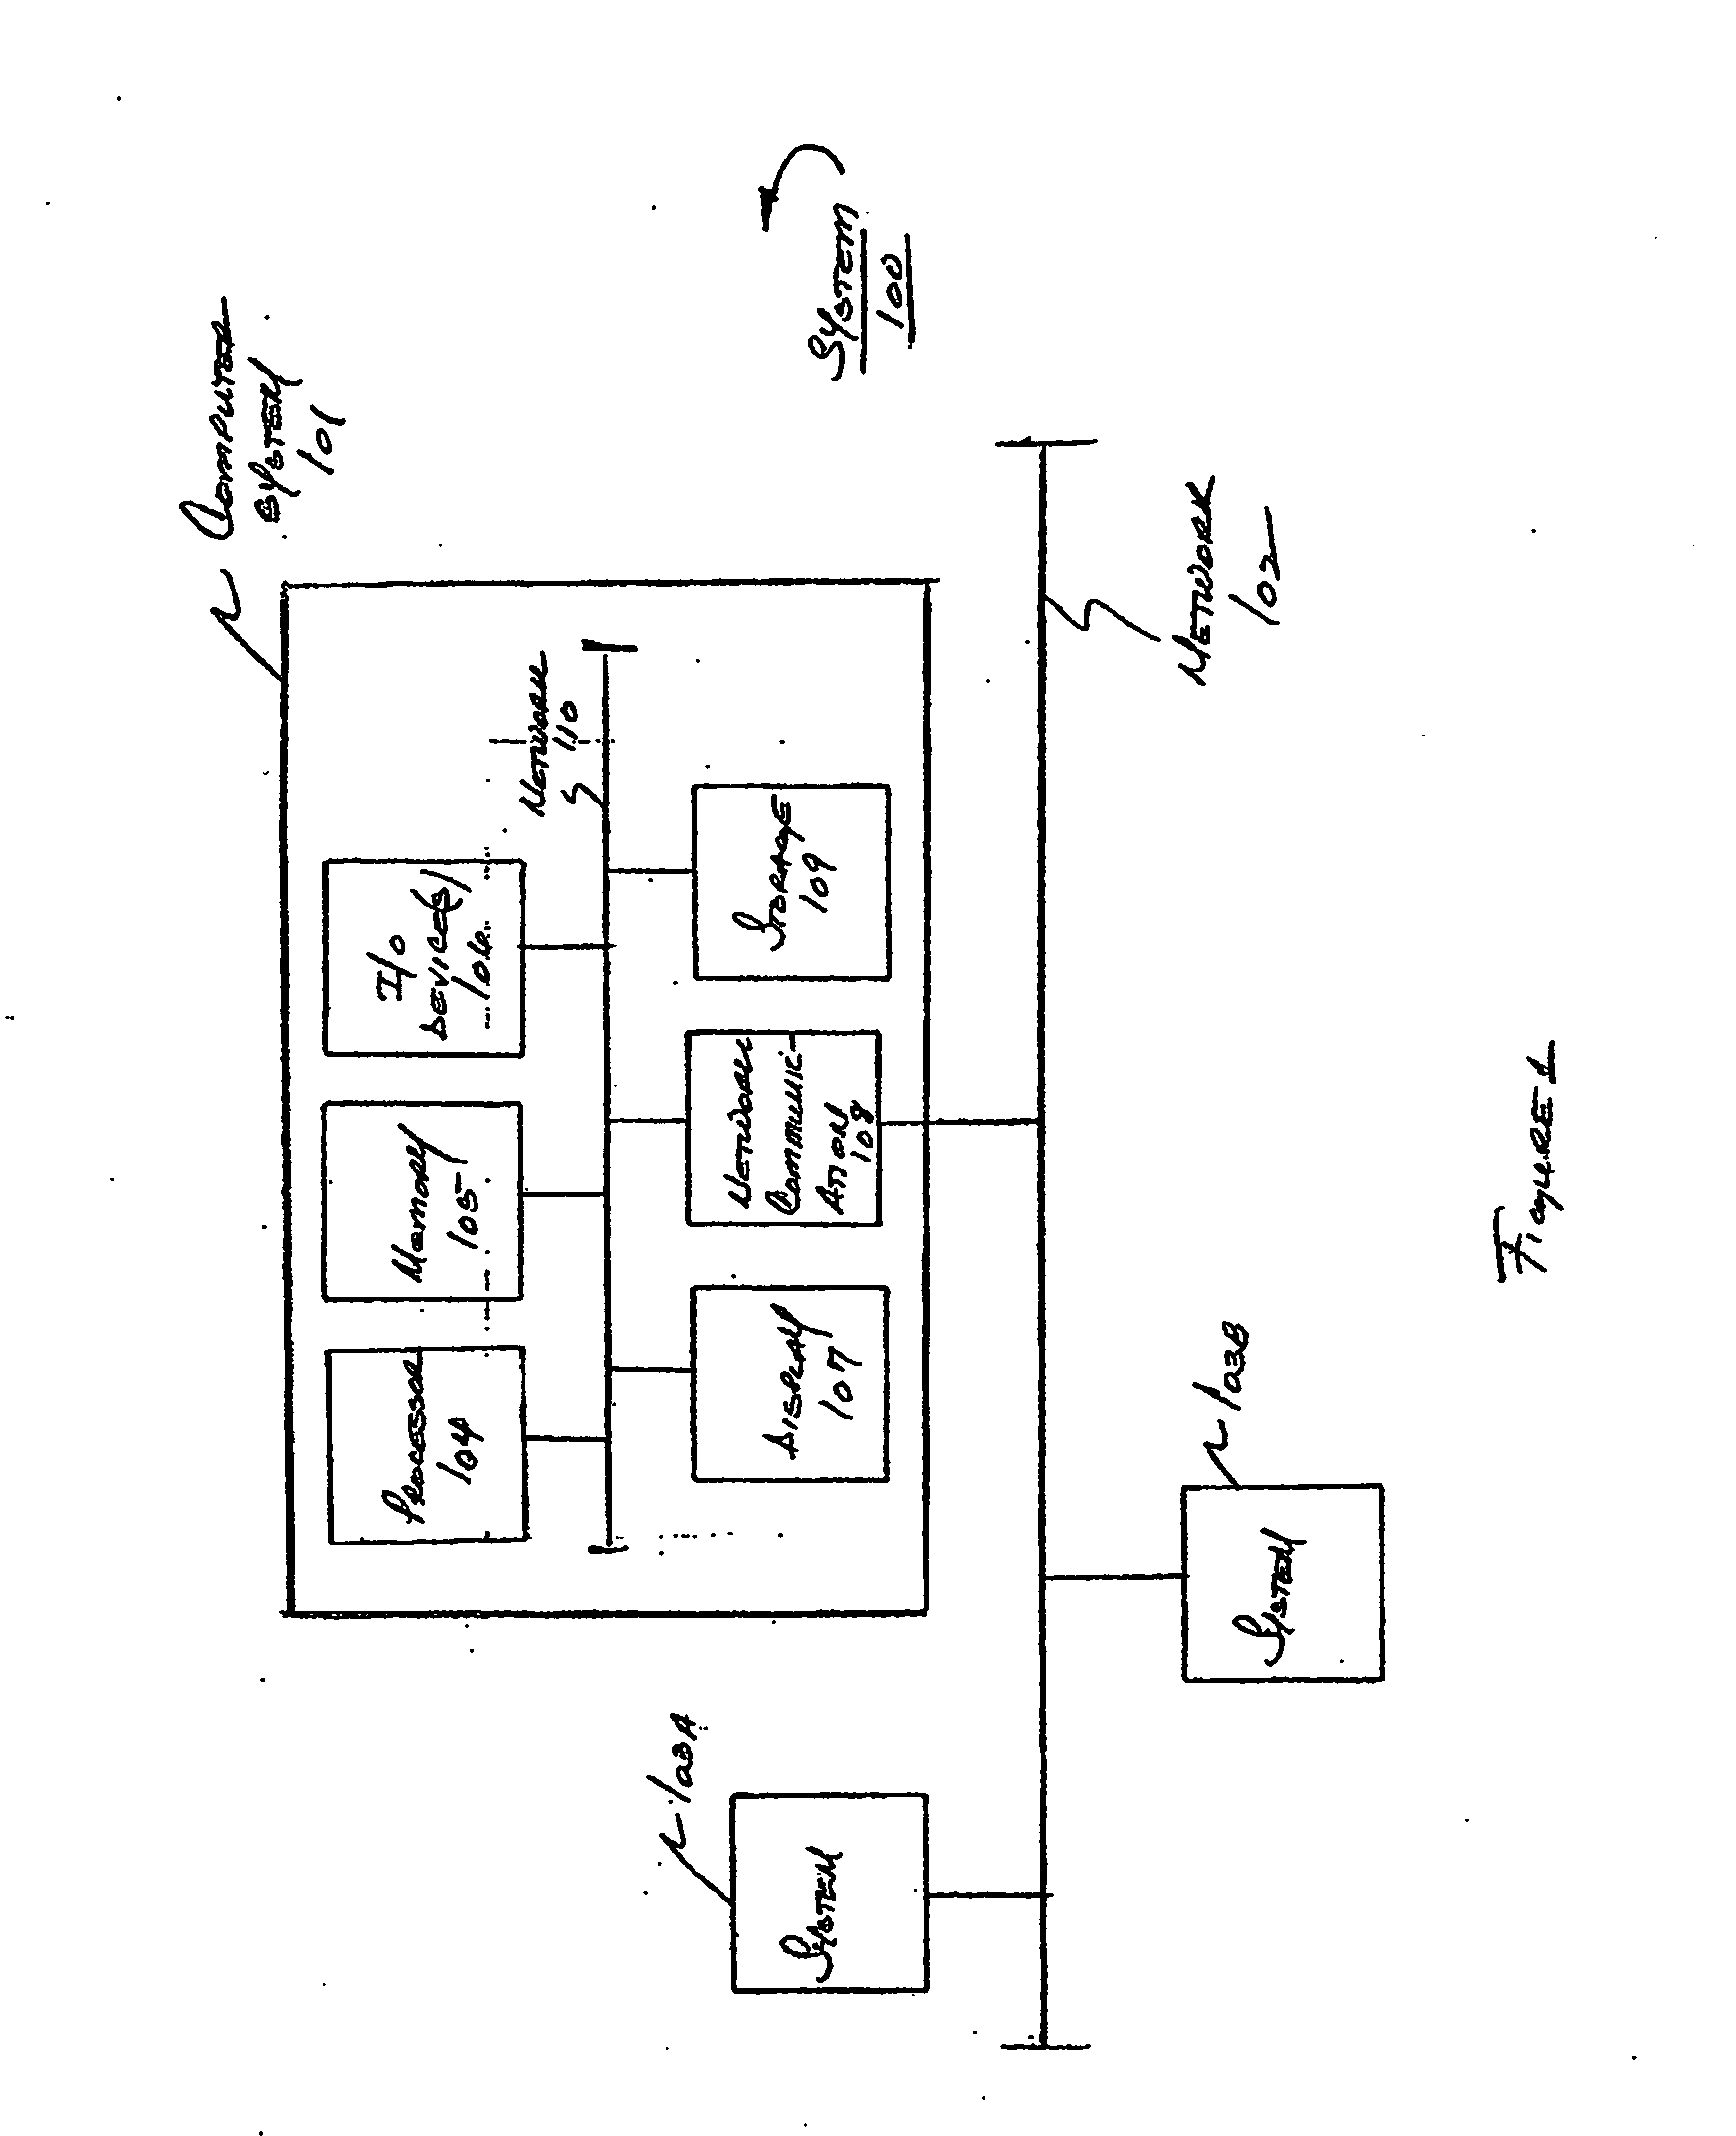 System and method for selecting advertising in a social bookmarking system